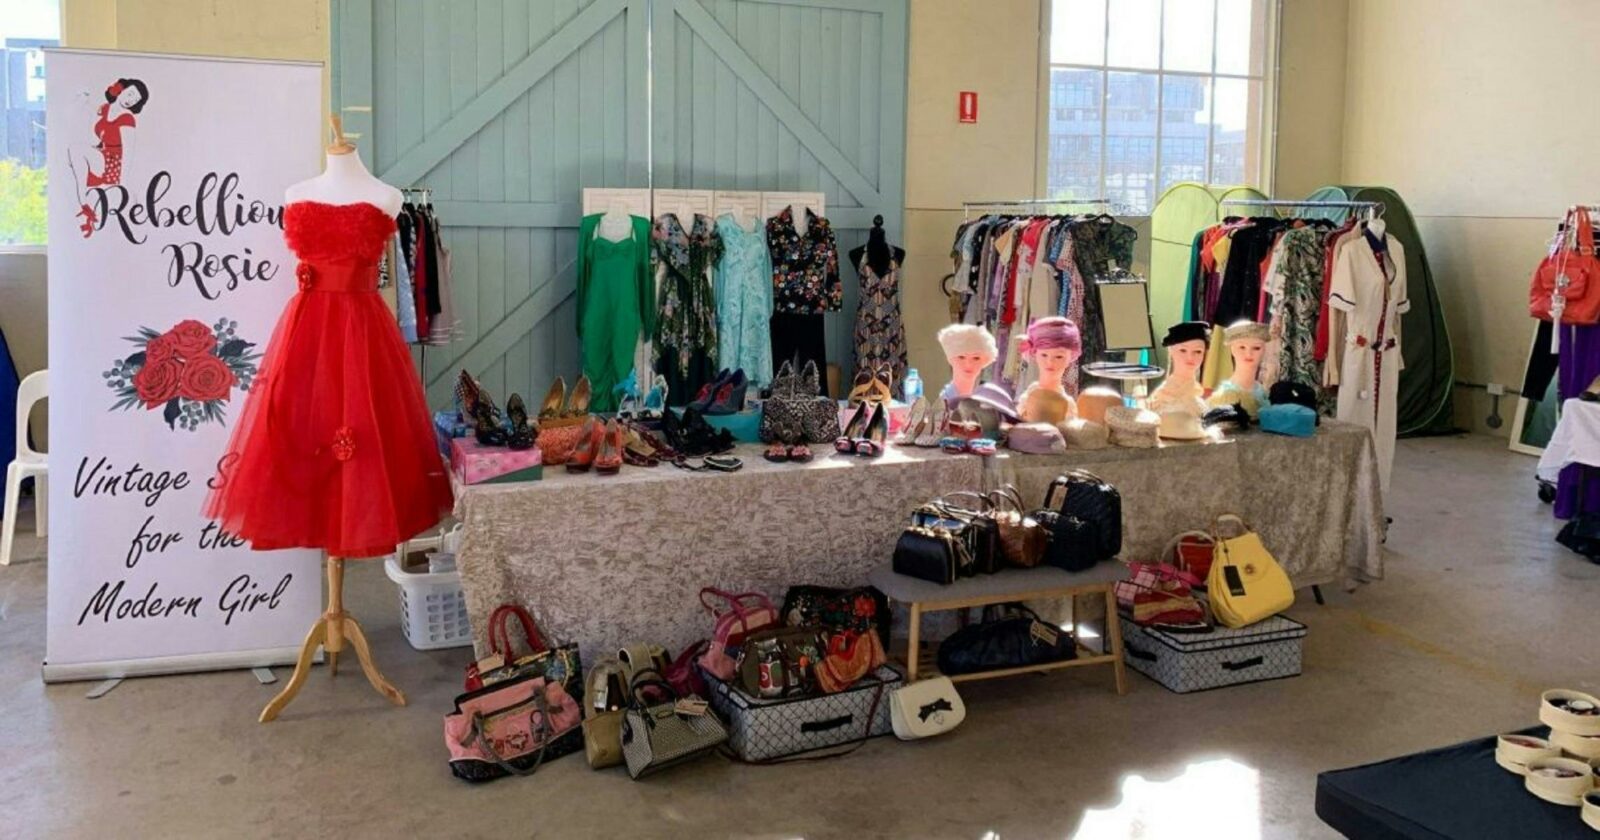 Stall showcasing colourful clothing and bags